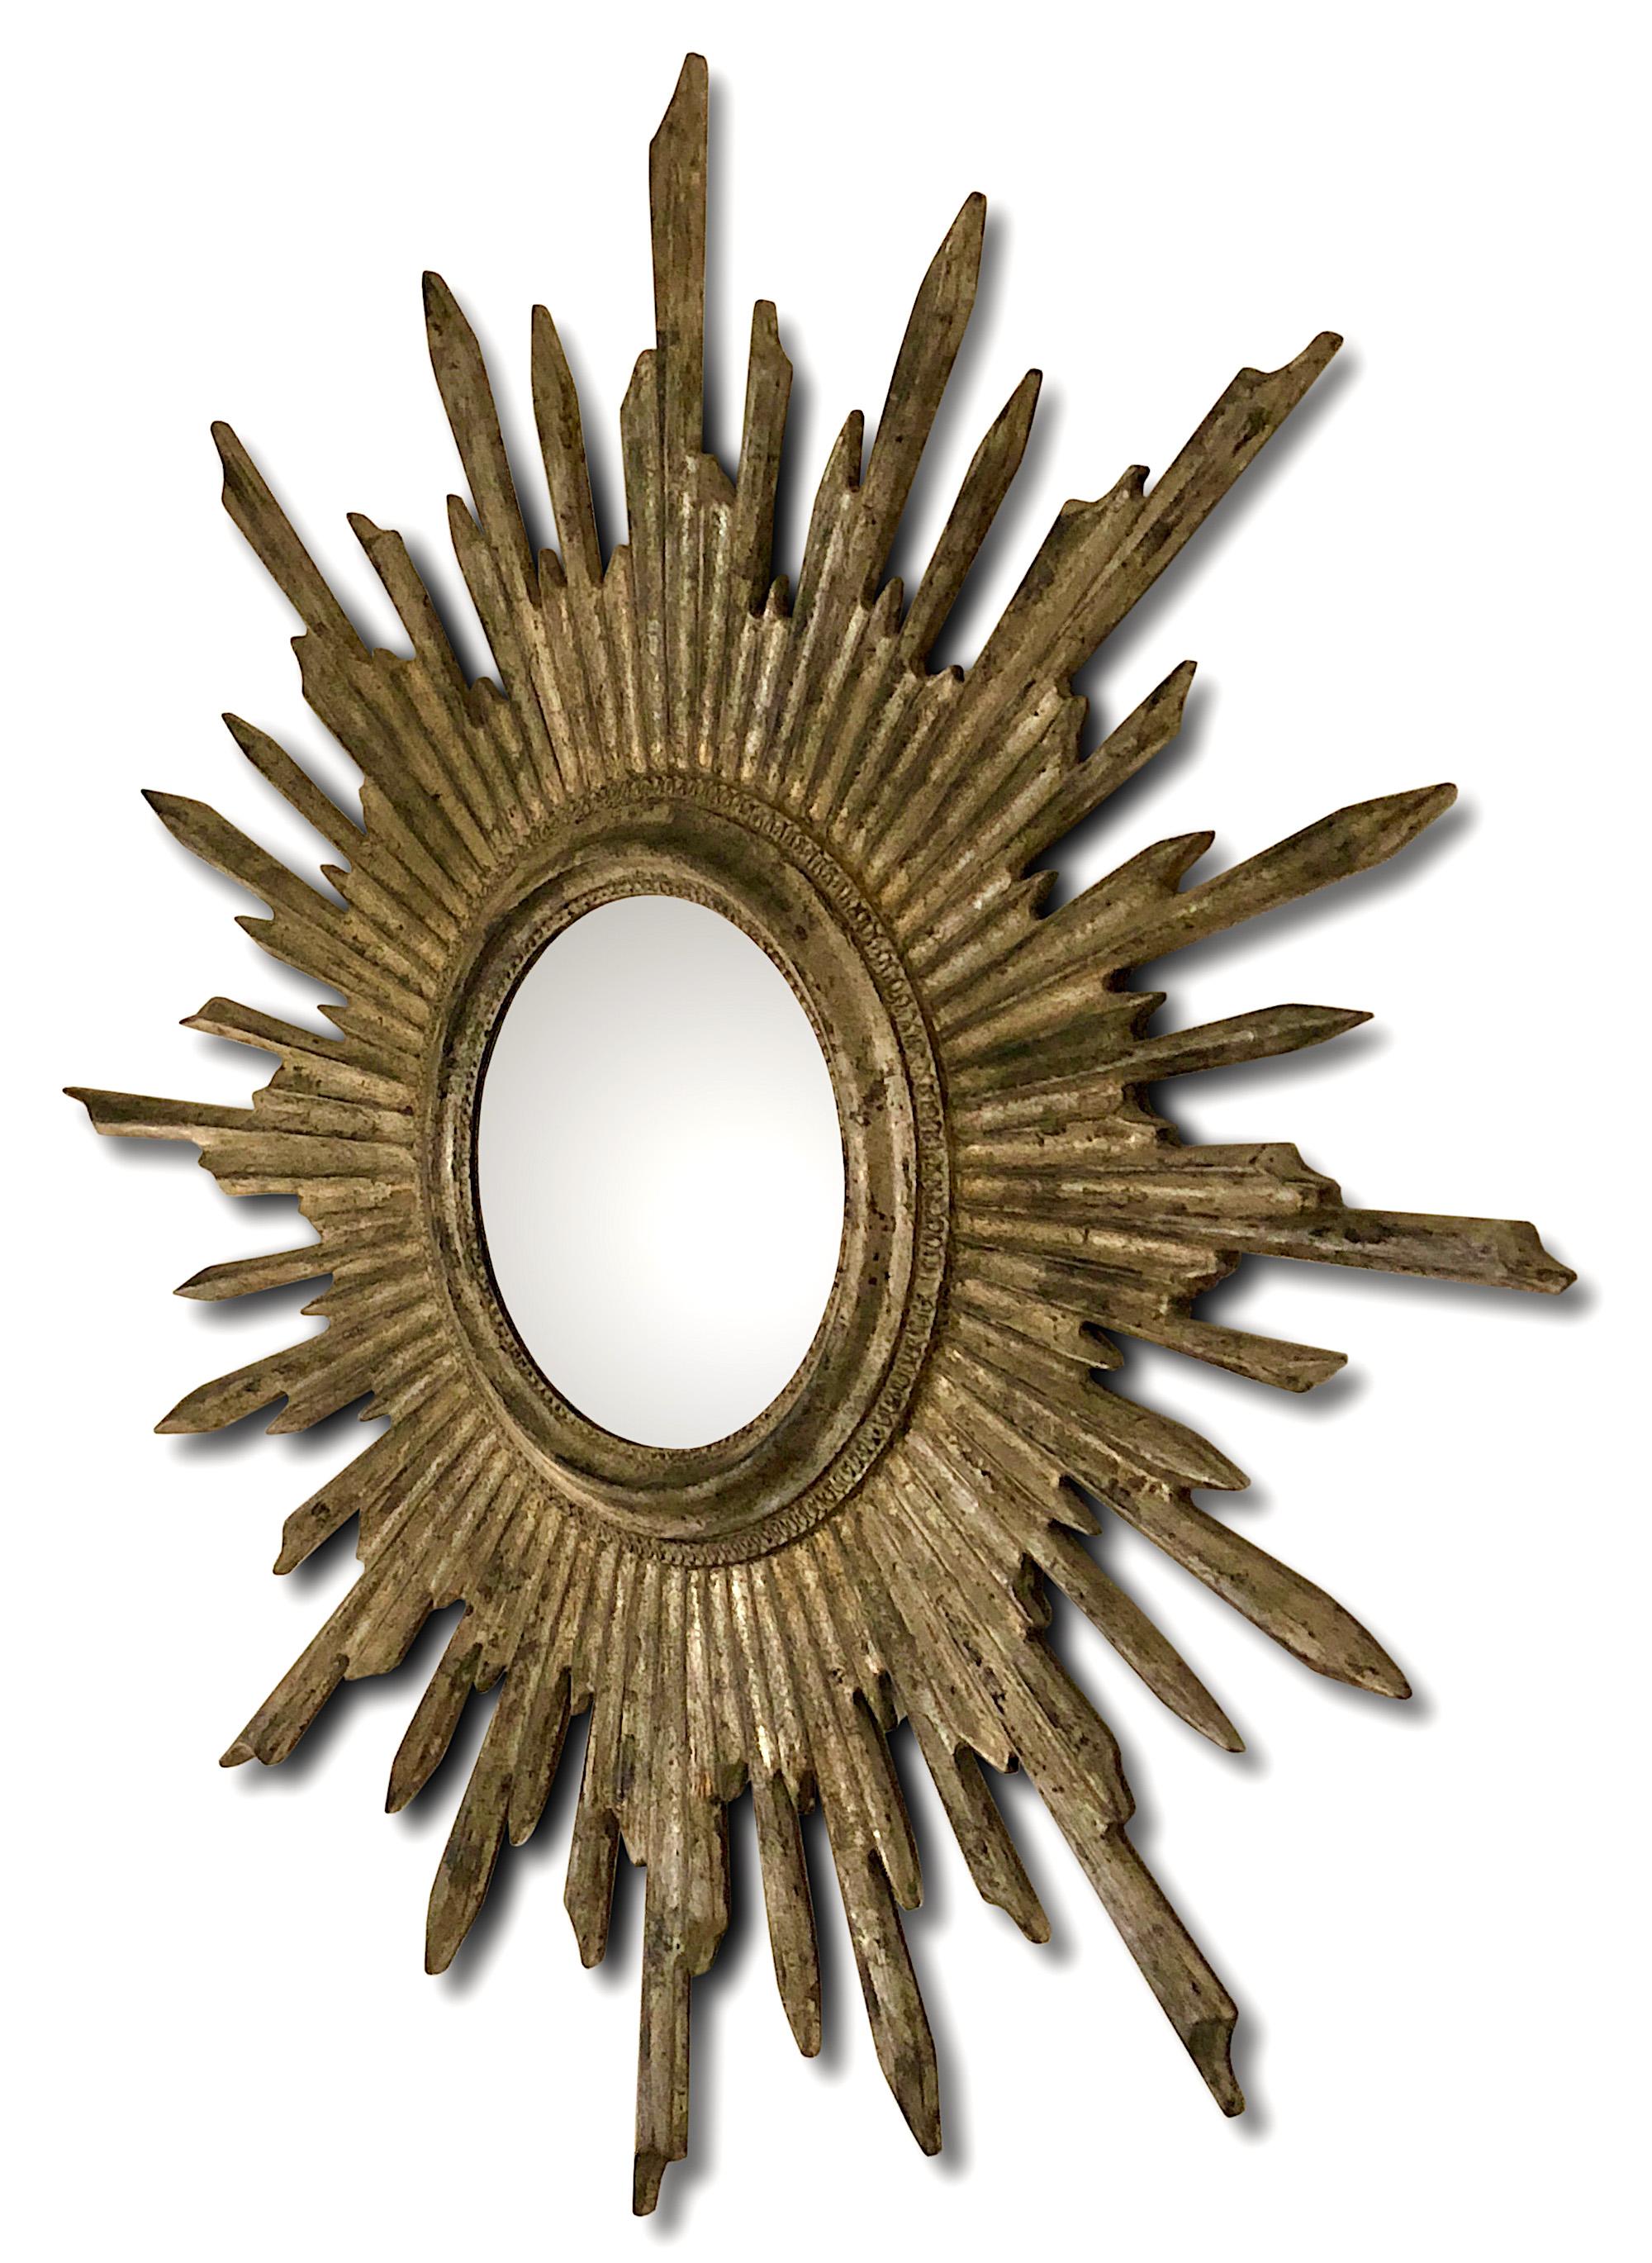 A convex sunburst mirror dating from the mid 1950s with an aged silver gilt leaf finish.

Dimensions
Entire diameter 71cm, Diameter of convex mirror 18cm.